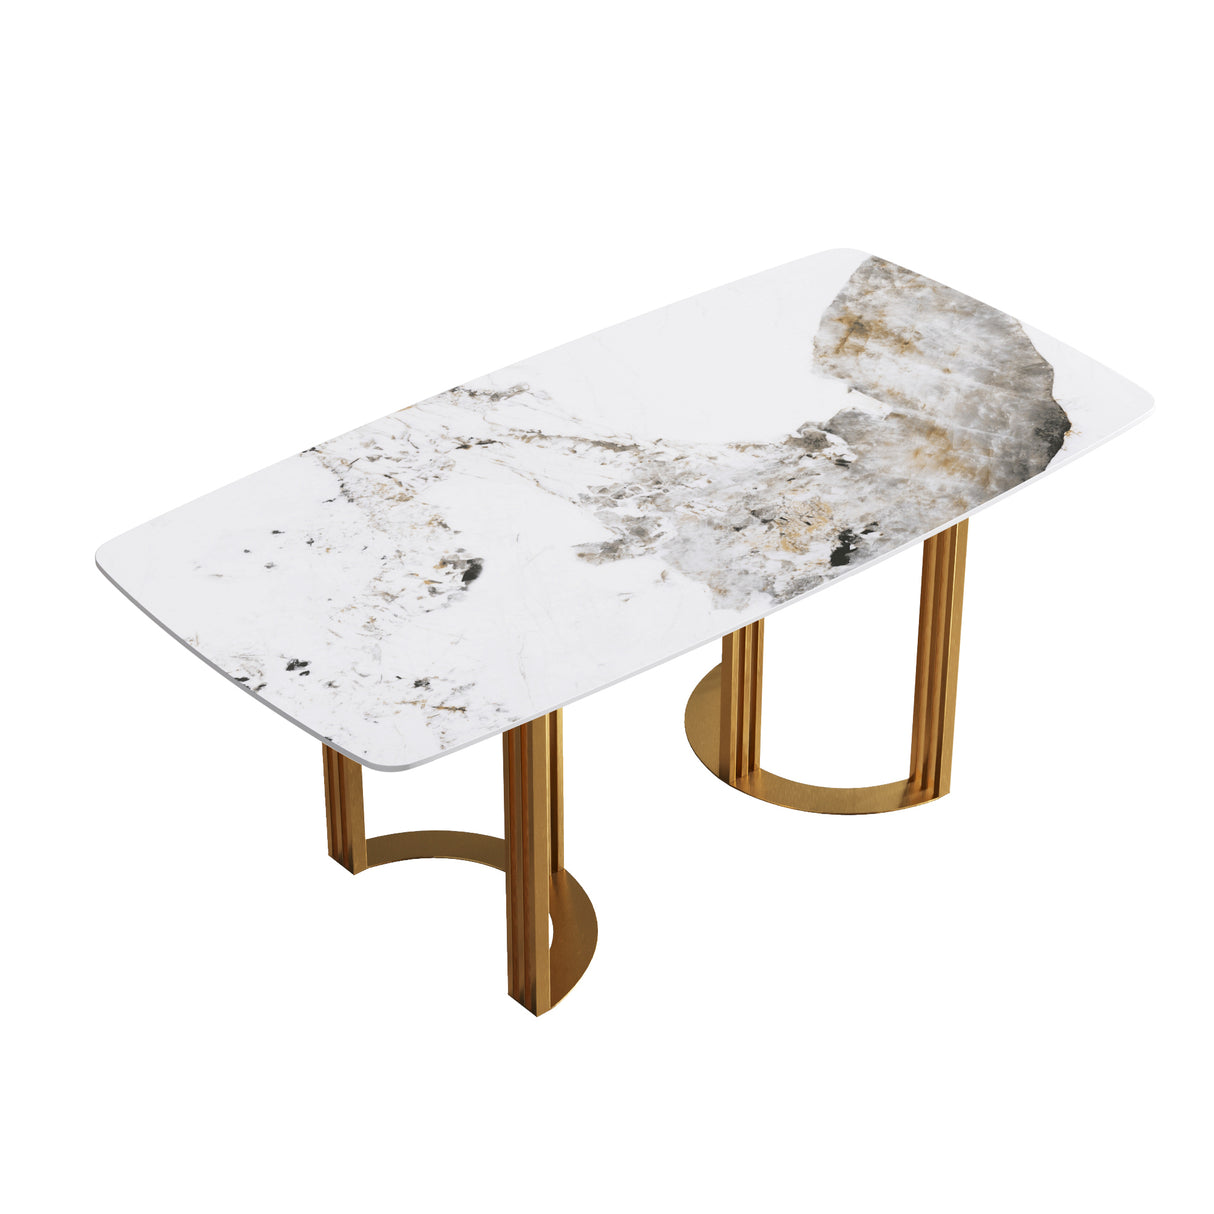 70.87"Modern artificial stone Pandora white curved golden metal leg dining table-can accommodate 6-8 people - Home Elegance USA